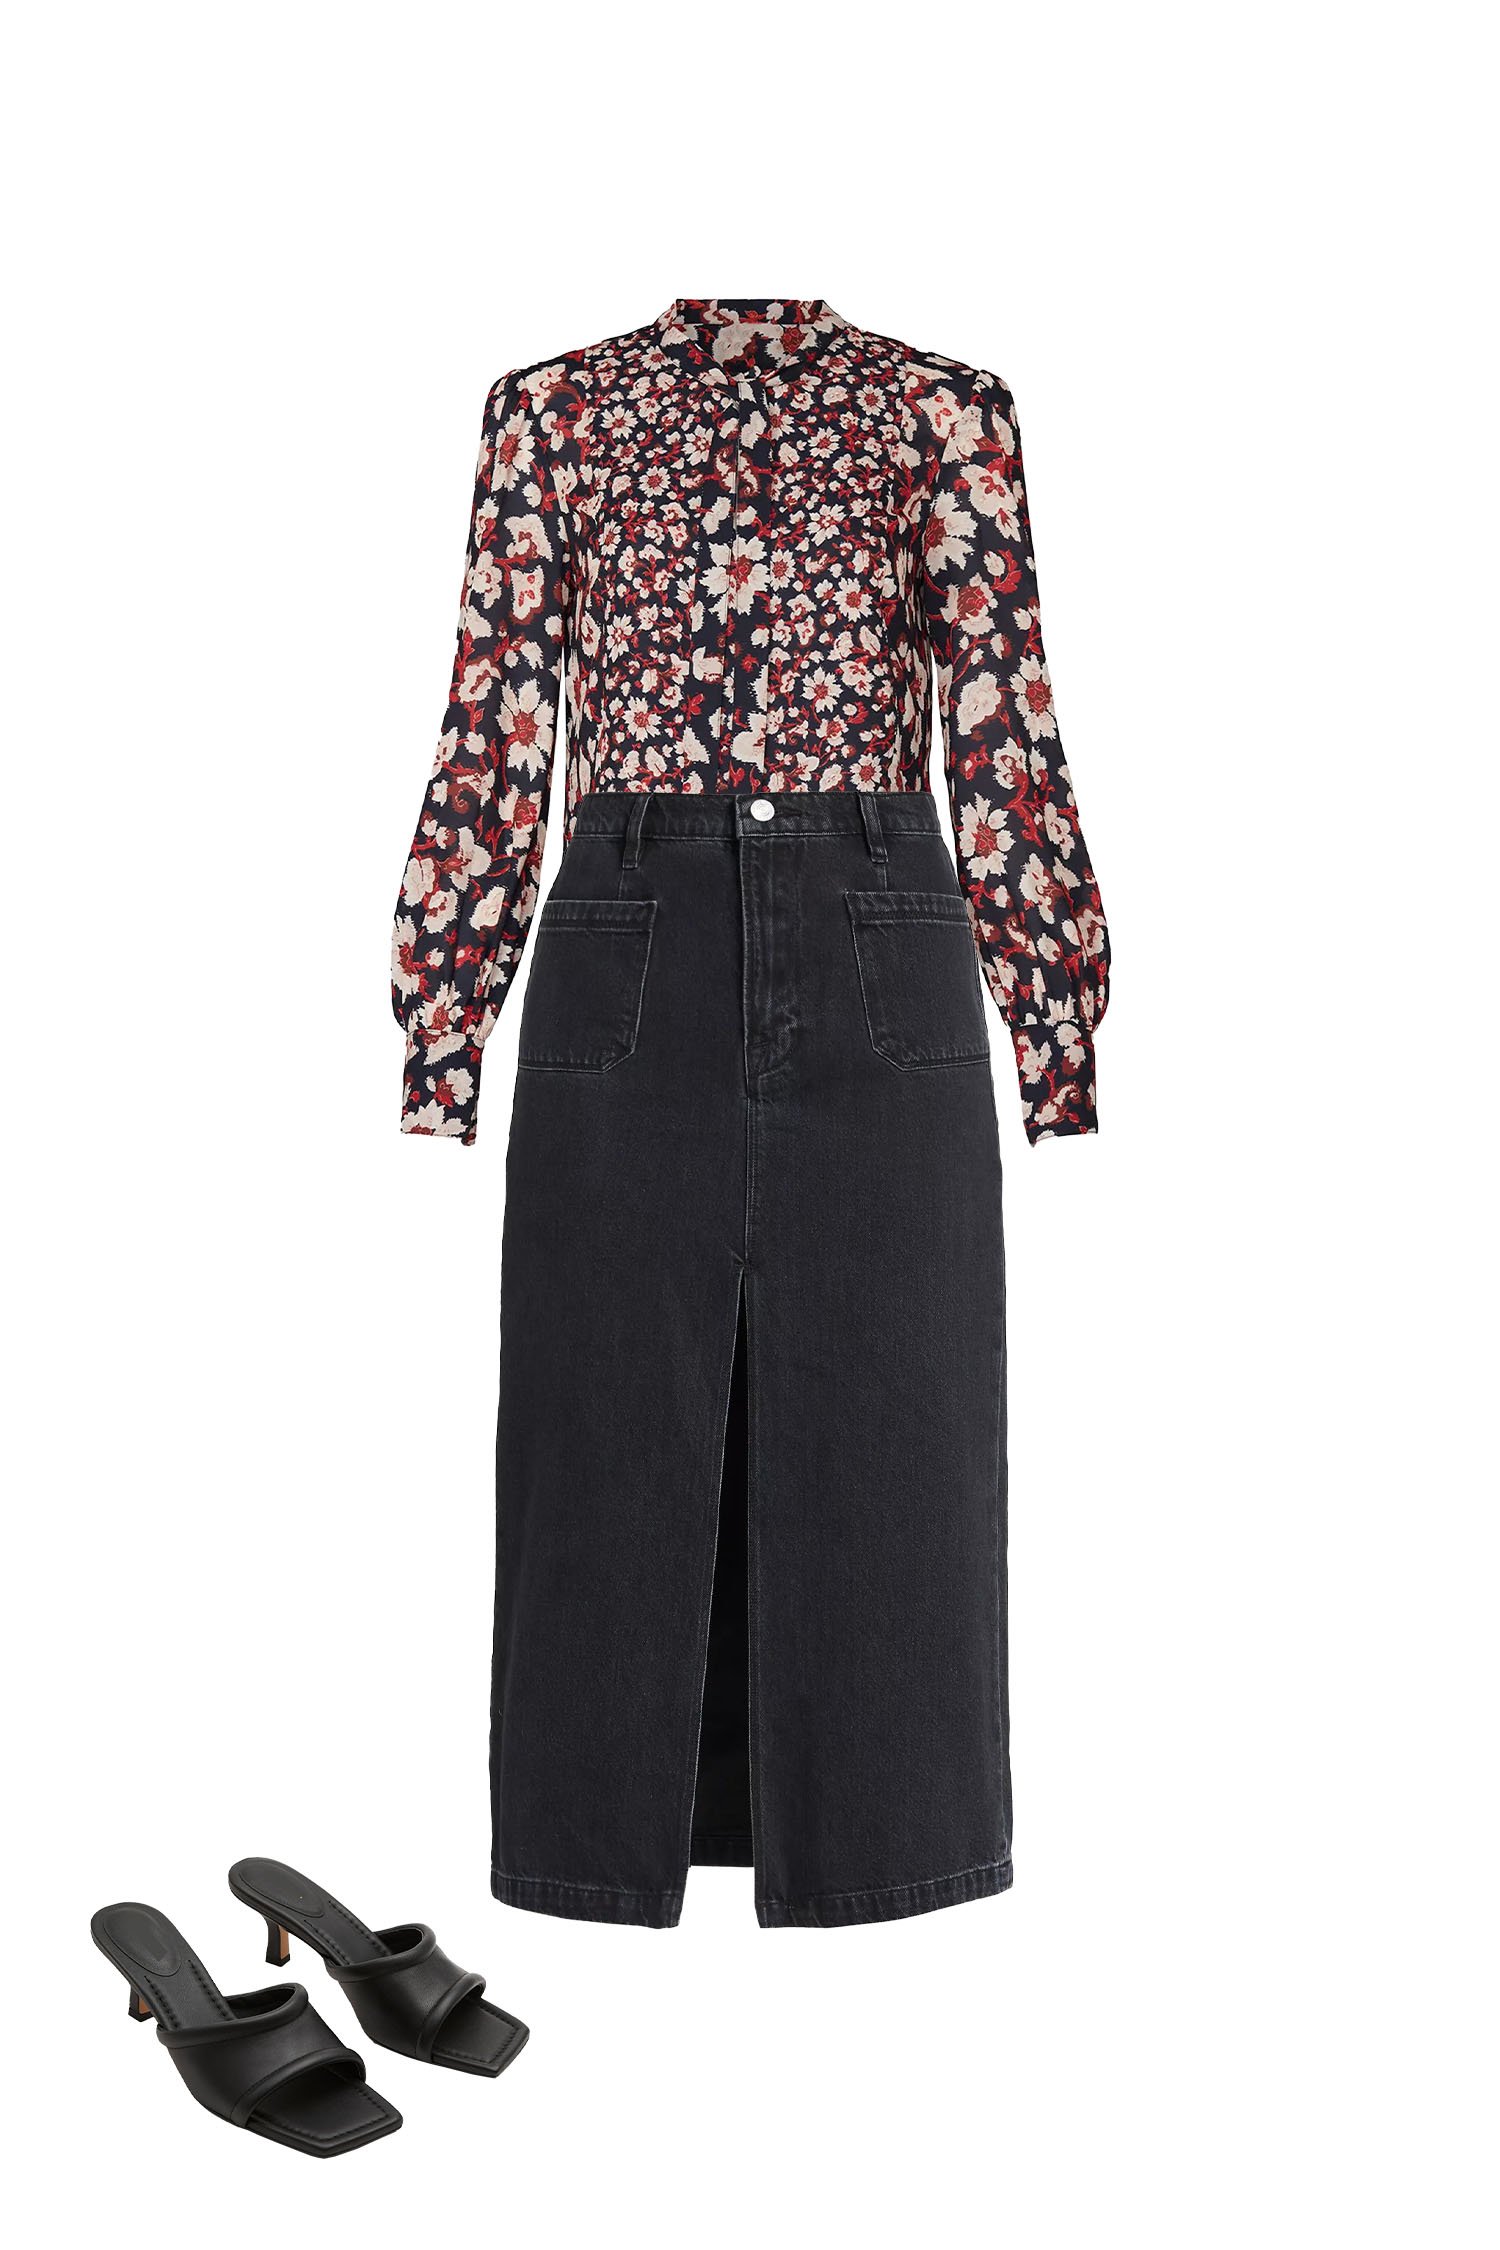 Black Denim Midi Skirt Outfit with Black and Red Floral Blouse and Black Square Toe Kitten Heel Sandals